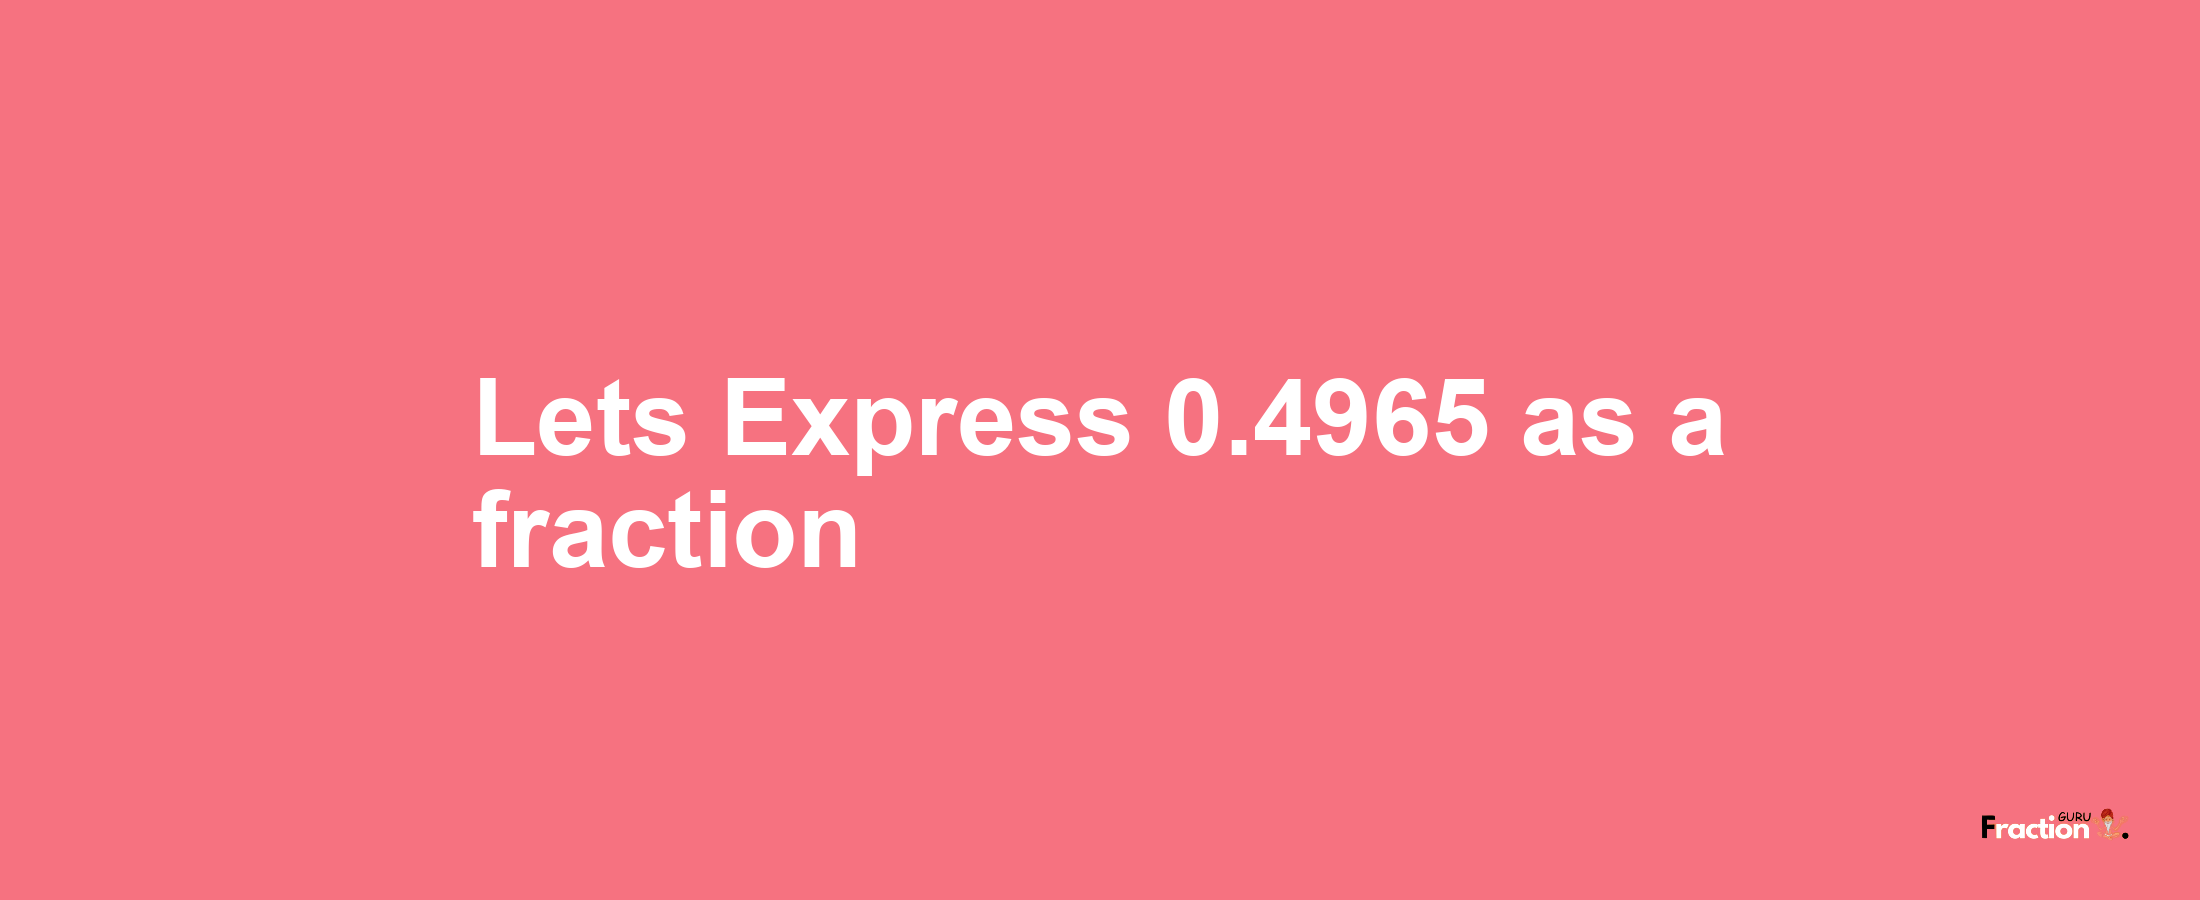 Lets Express 0.4965 as afraction